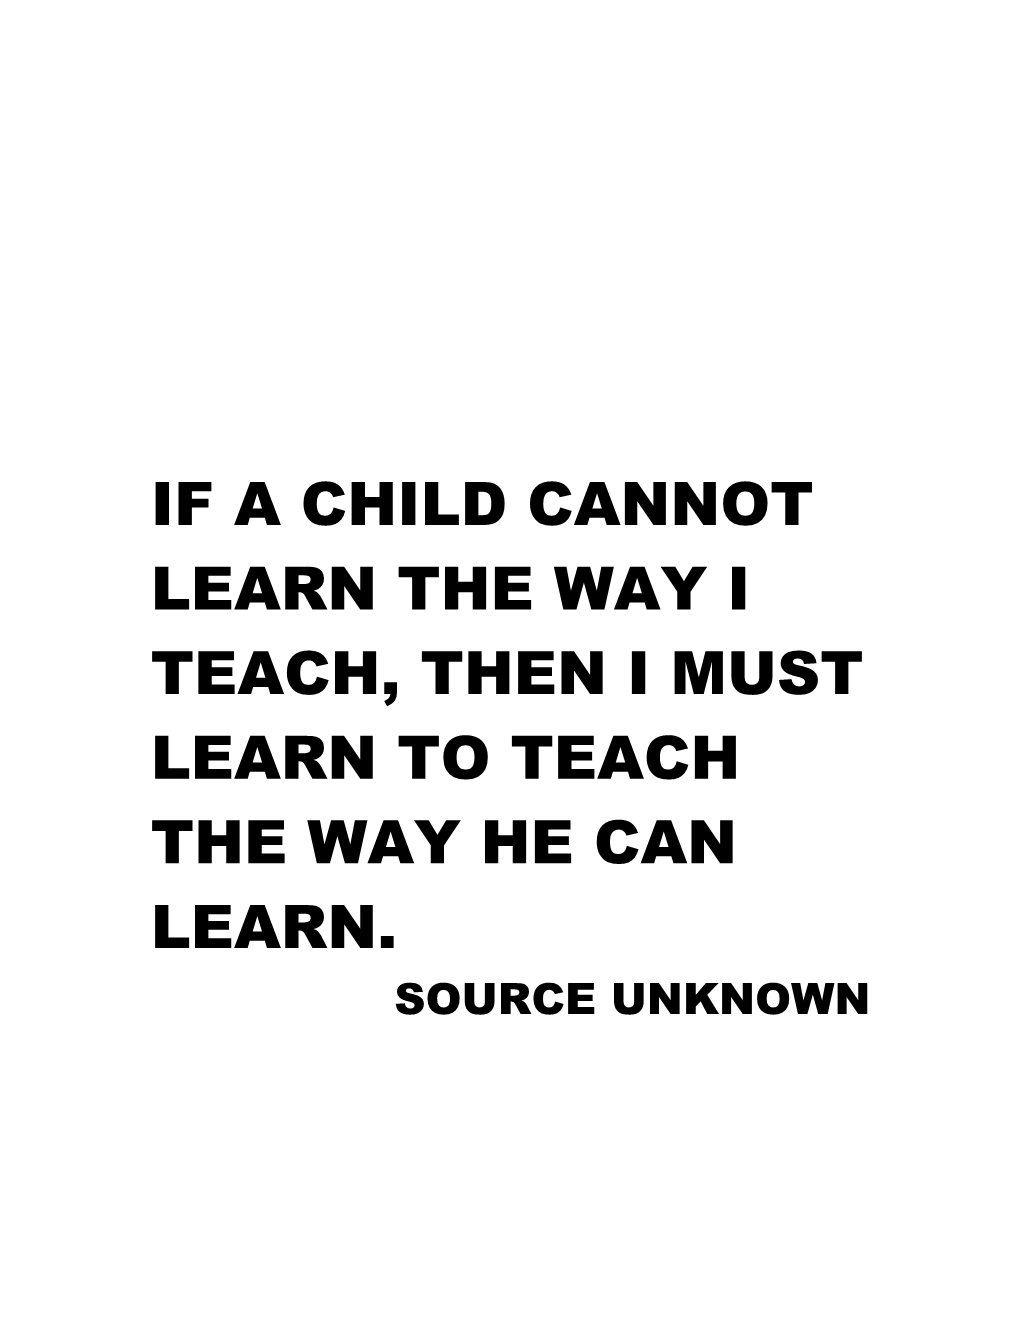 If a Child Cannot Learn the Way I Teach, Then I Must Learn to Teach the Way He Can Learn